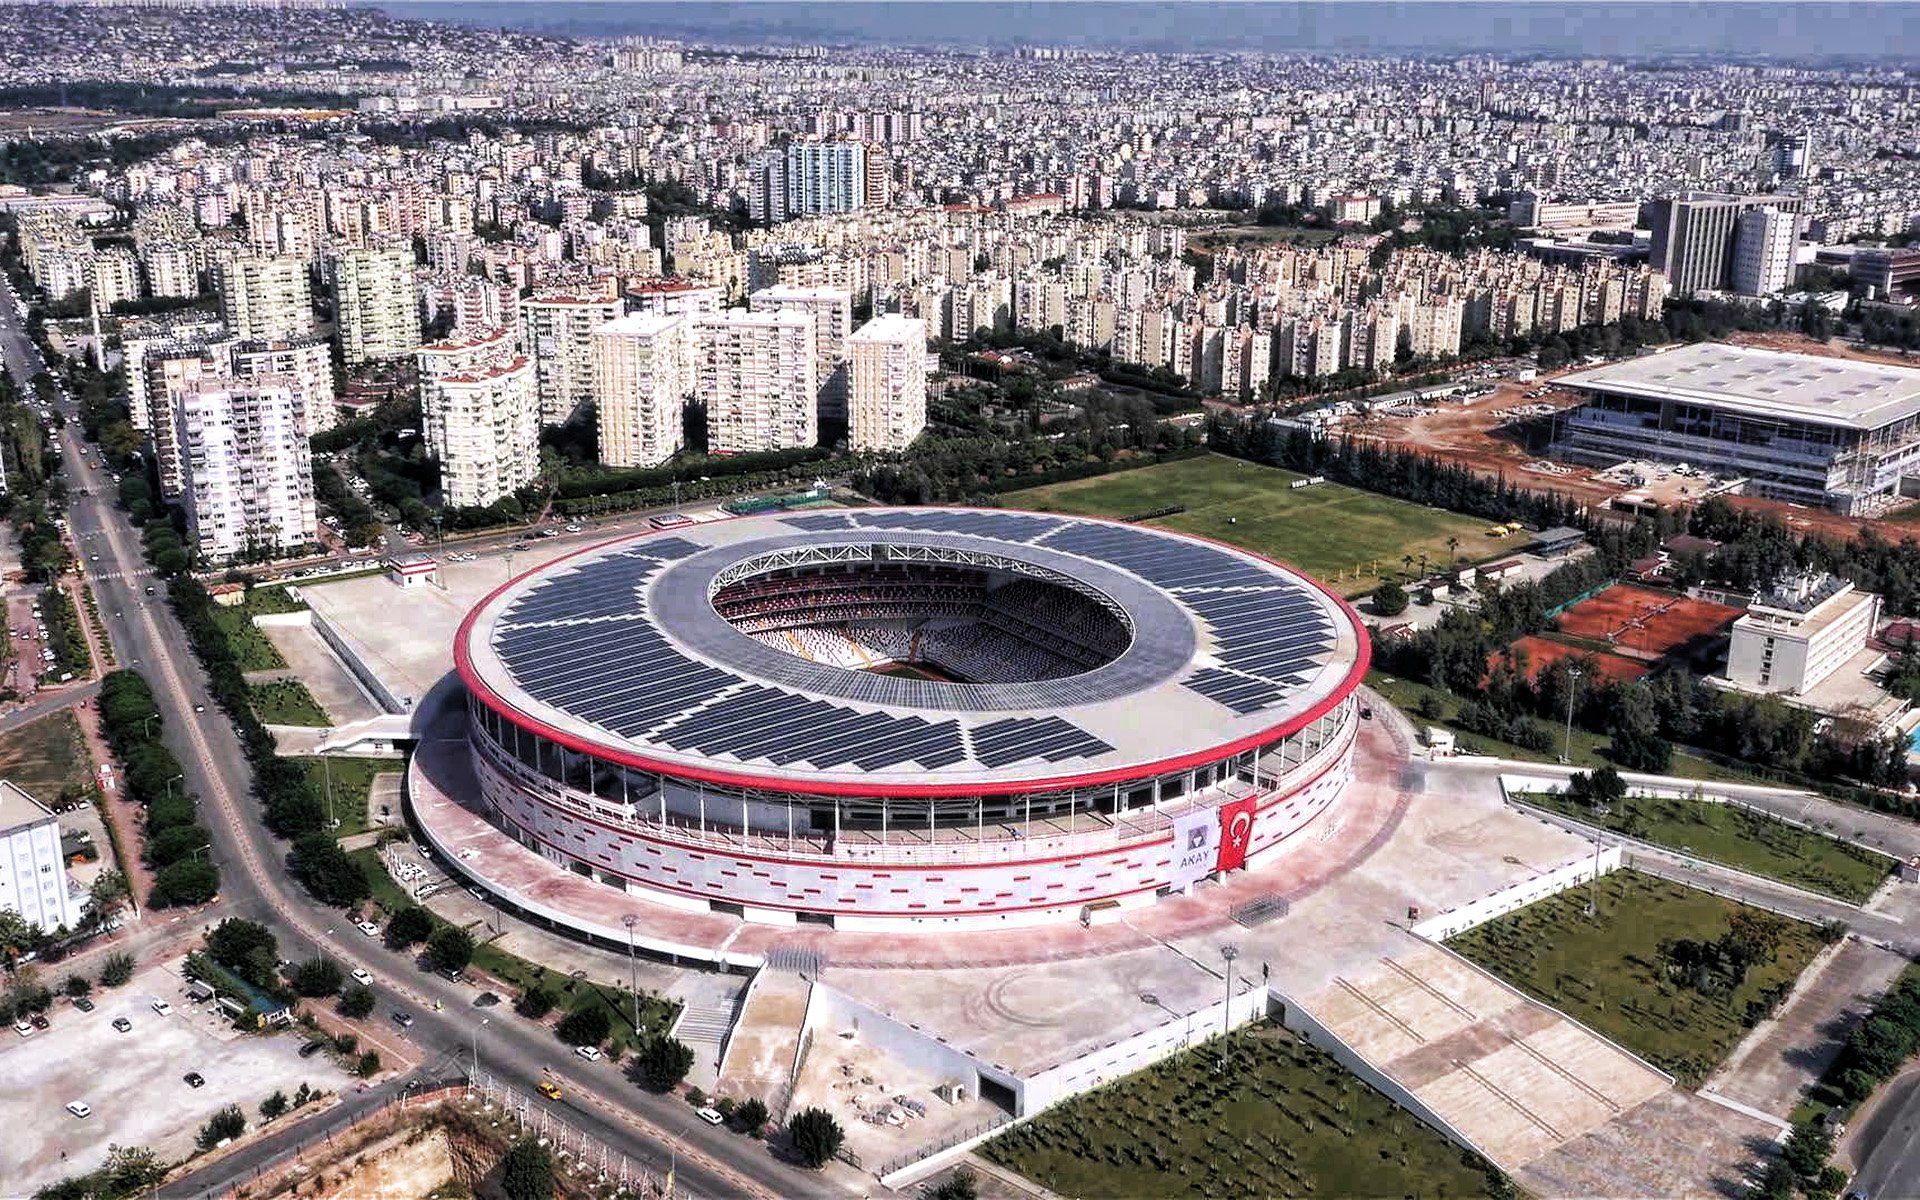 Download wallpaper Antalya Arena, cityscapes, aerial view